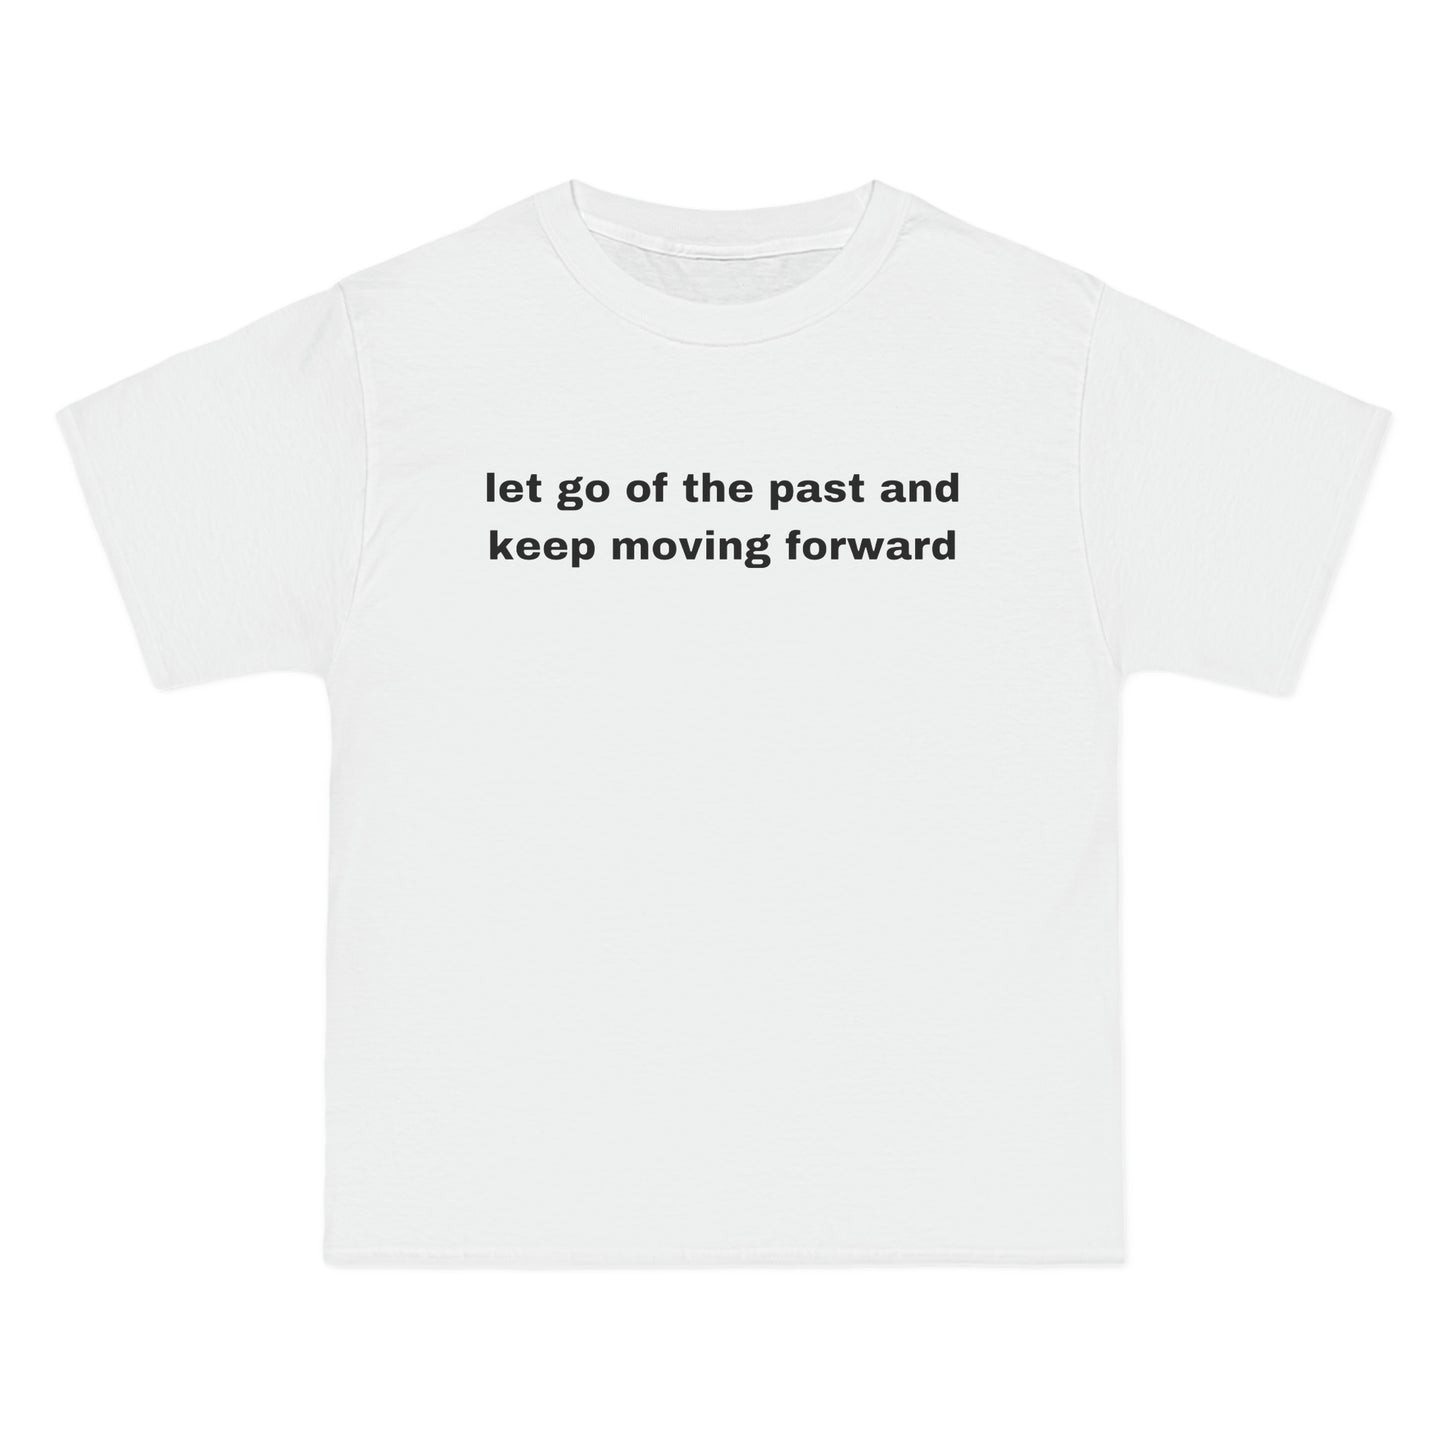 let go of the past and keep moving forward Tee